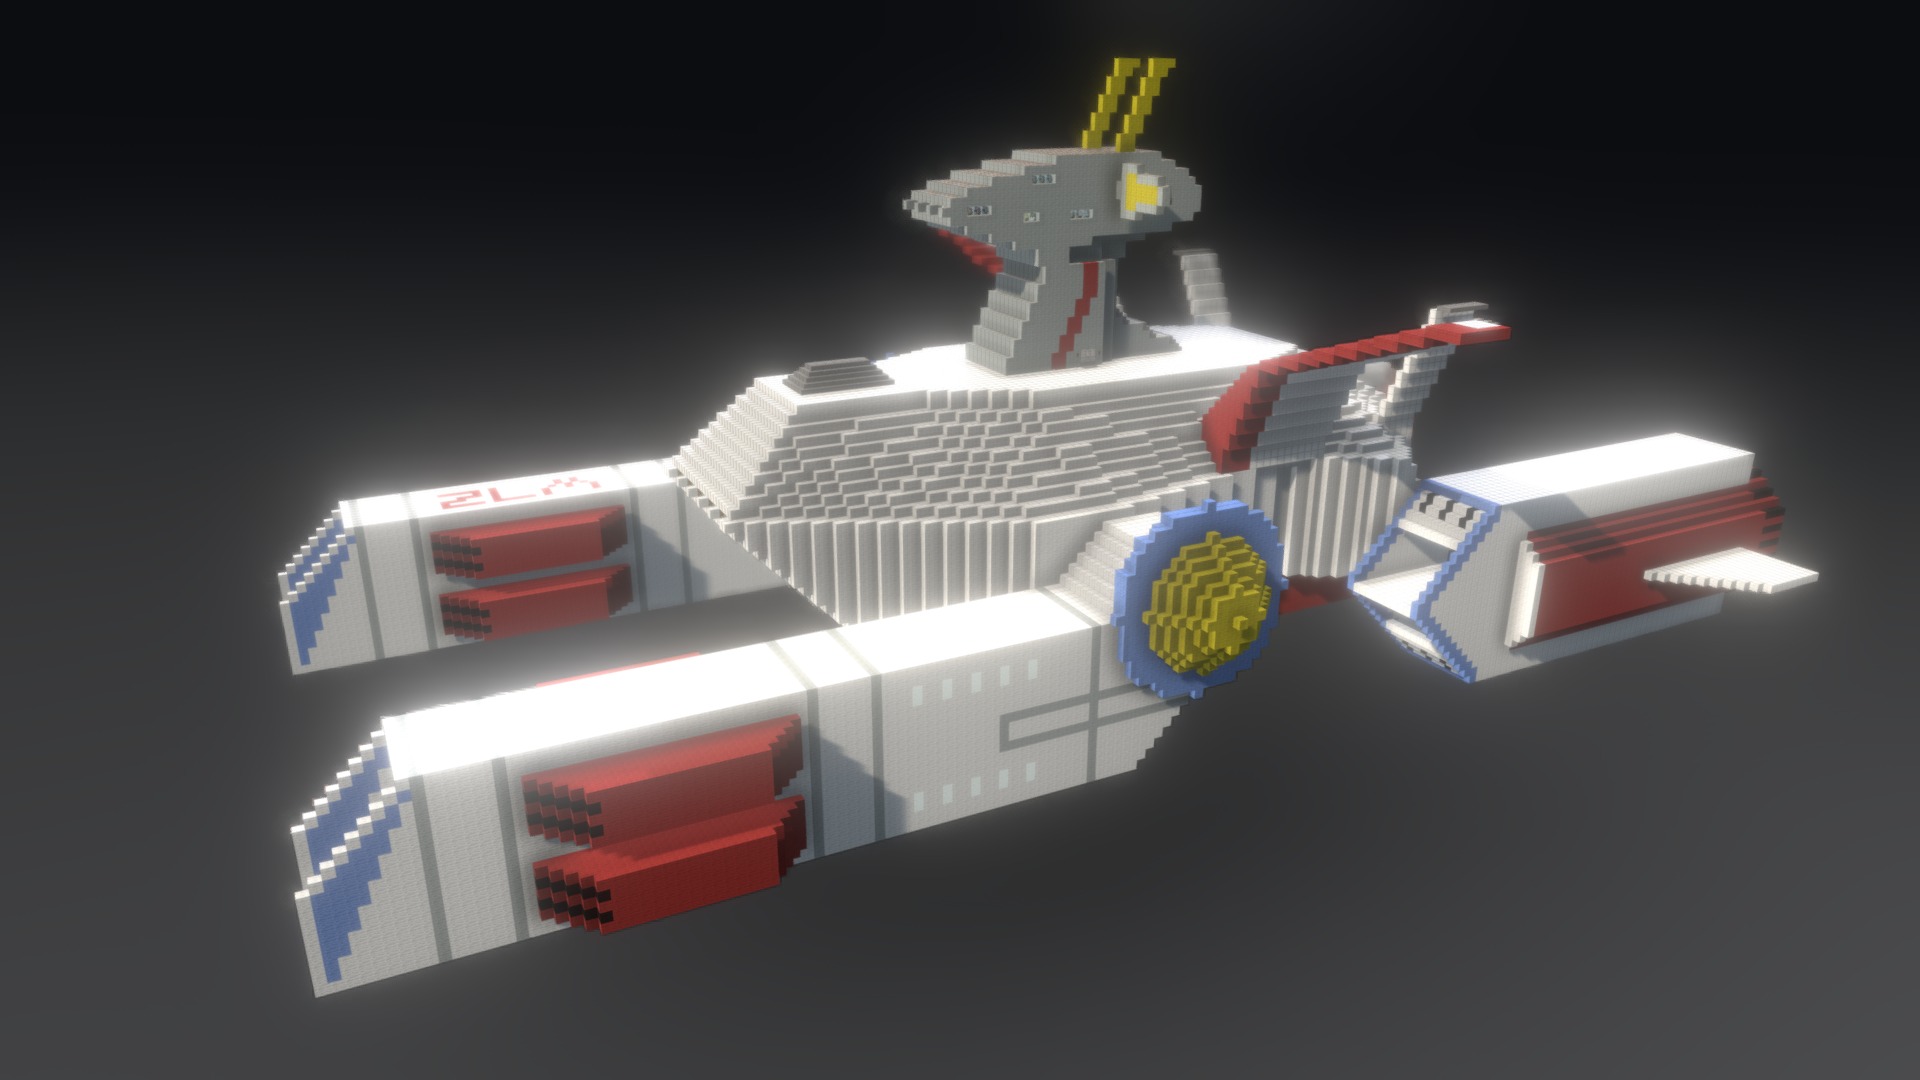 3D model 白色基地 / Whitebase - This is a 3D model of the 白色基地 / Whitebase. The 3D model is about a model of a space ship.